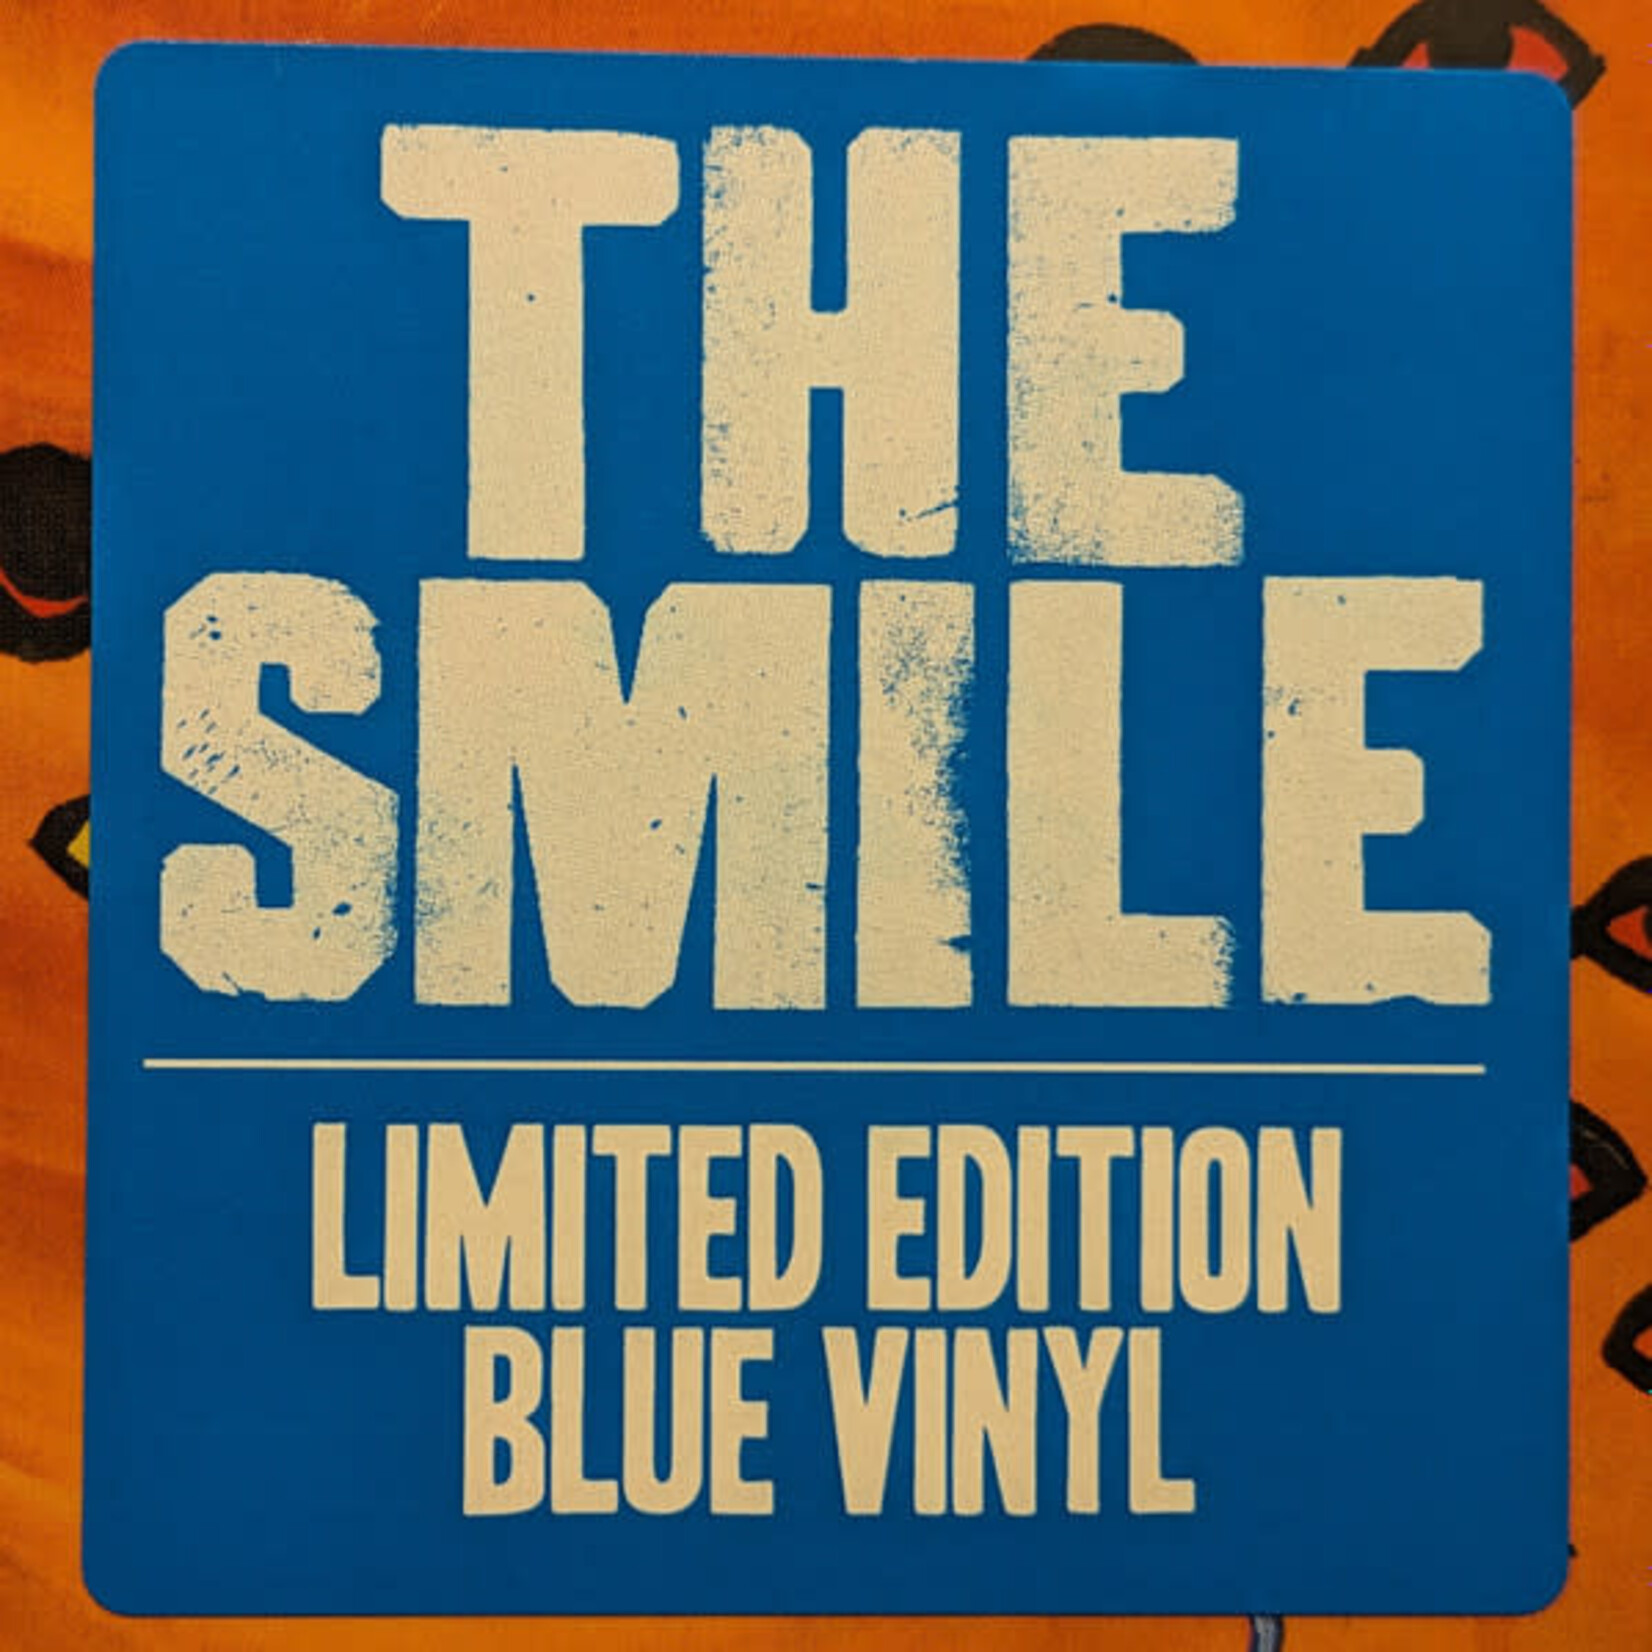 The Smile - Wall Of Eyes - Limited Edition Blue Vinyl, LP, XL Recordings,  2024